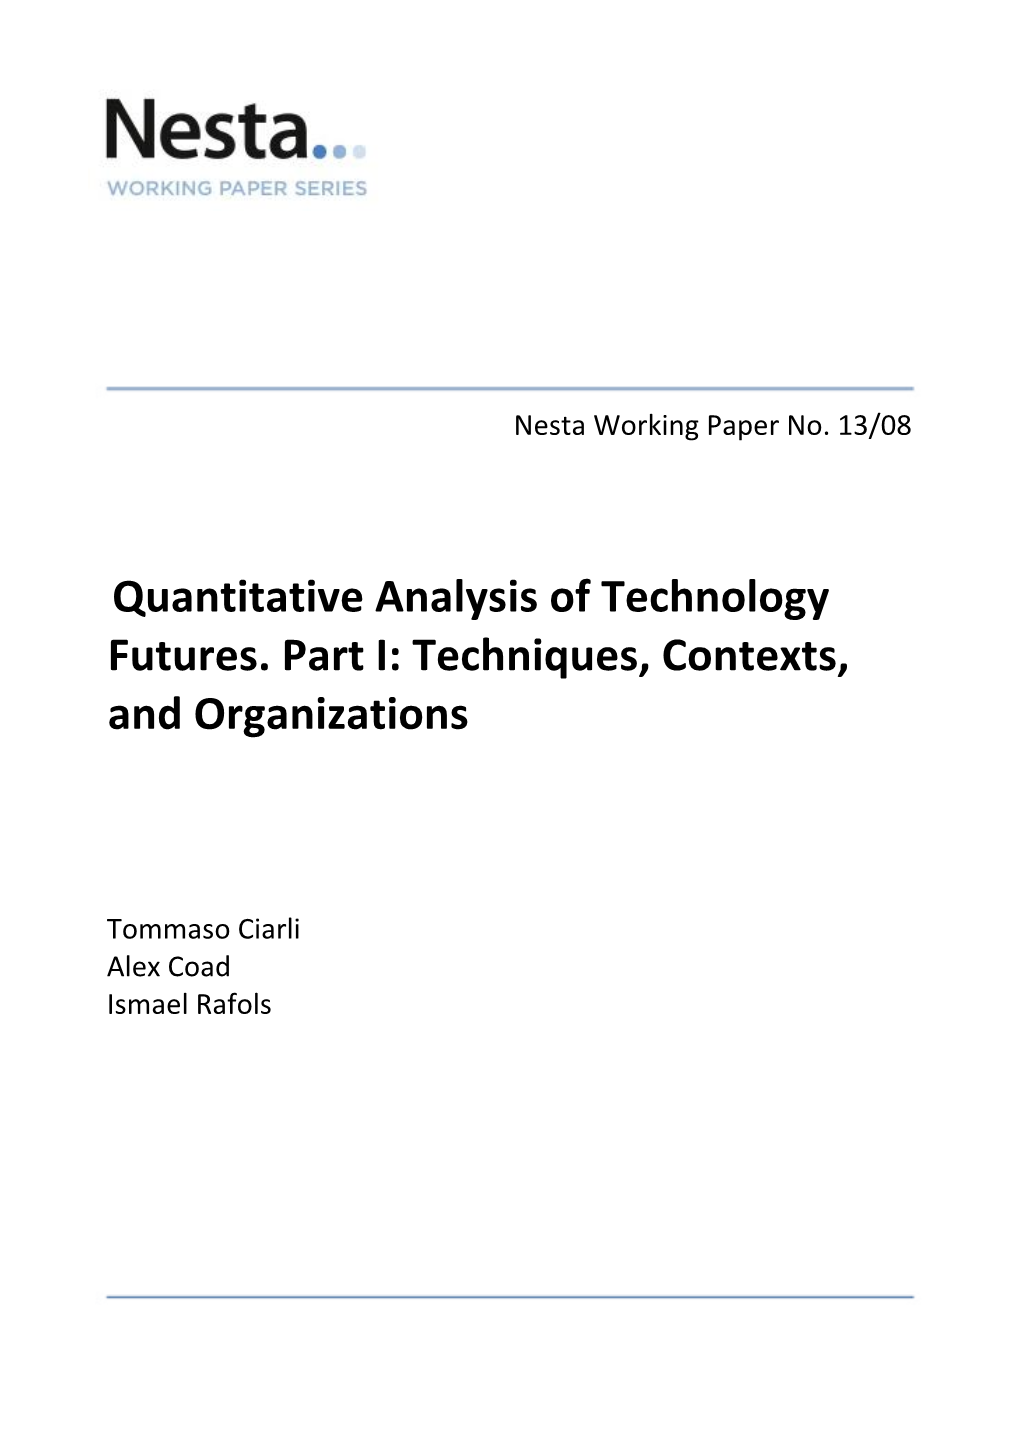 Quantitative Analysis of Technology Futures. Part I: Techniques, Contexts, and Organizations